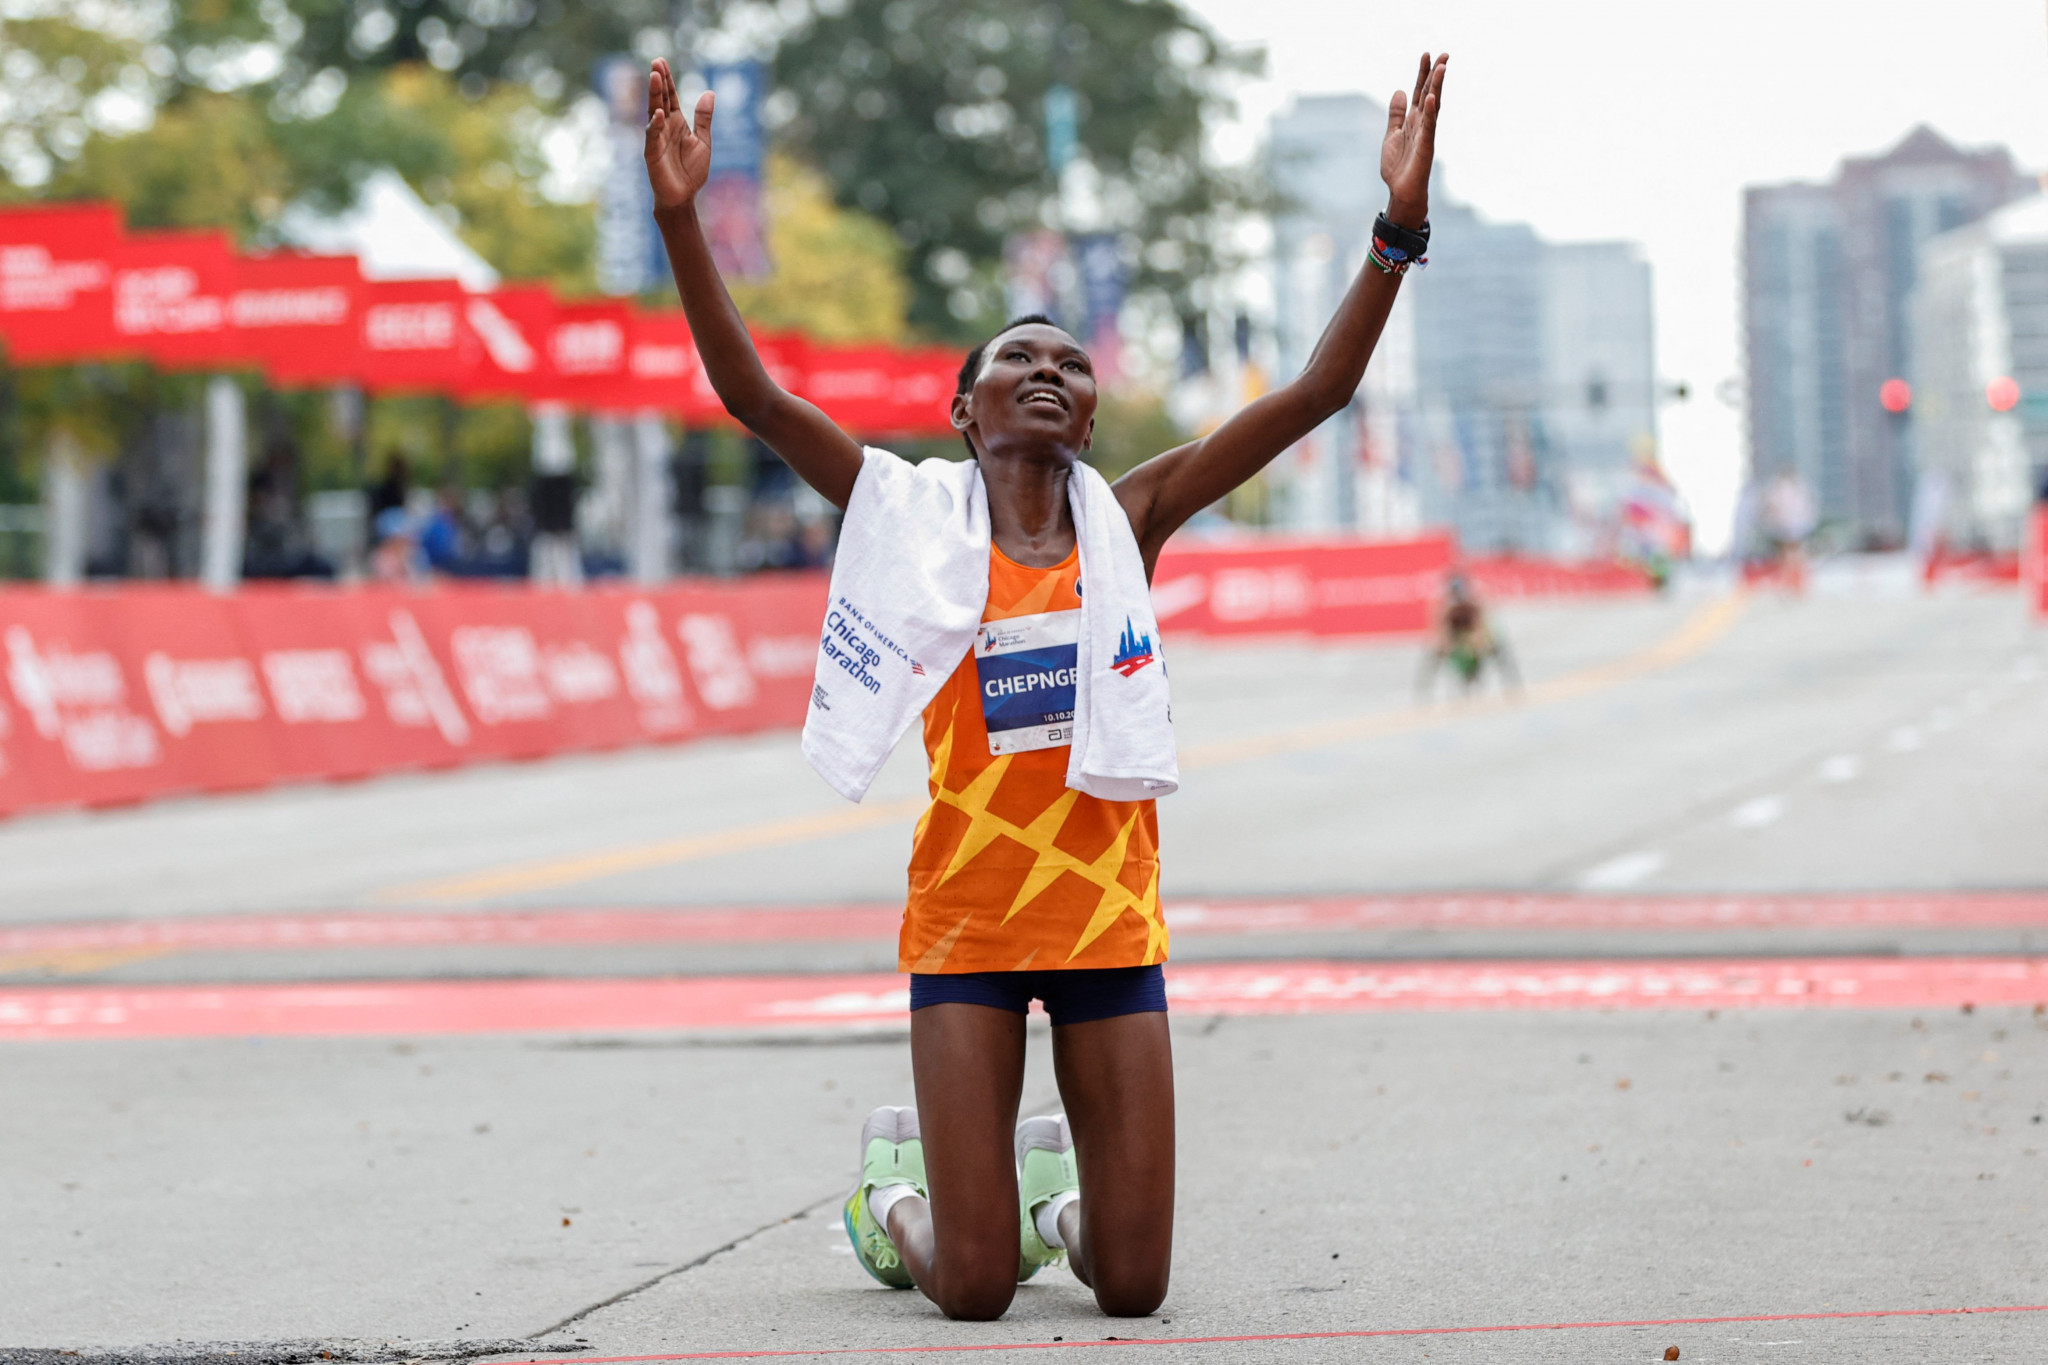 Kenya's Ruth Chepngetich won the Chicago Marathon in her first race over the 26.2 miles distance since lifting the World Championships title in Doha in 2019 ©Getty Images